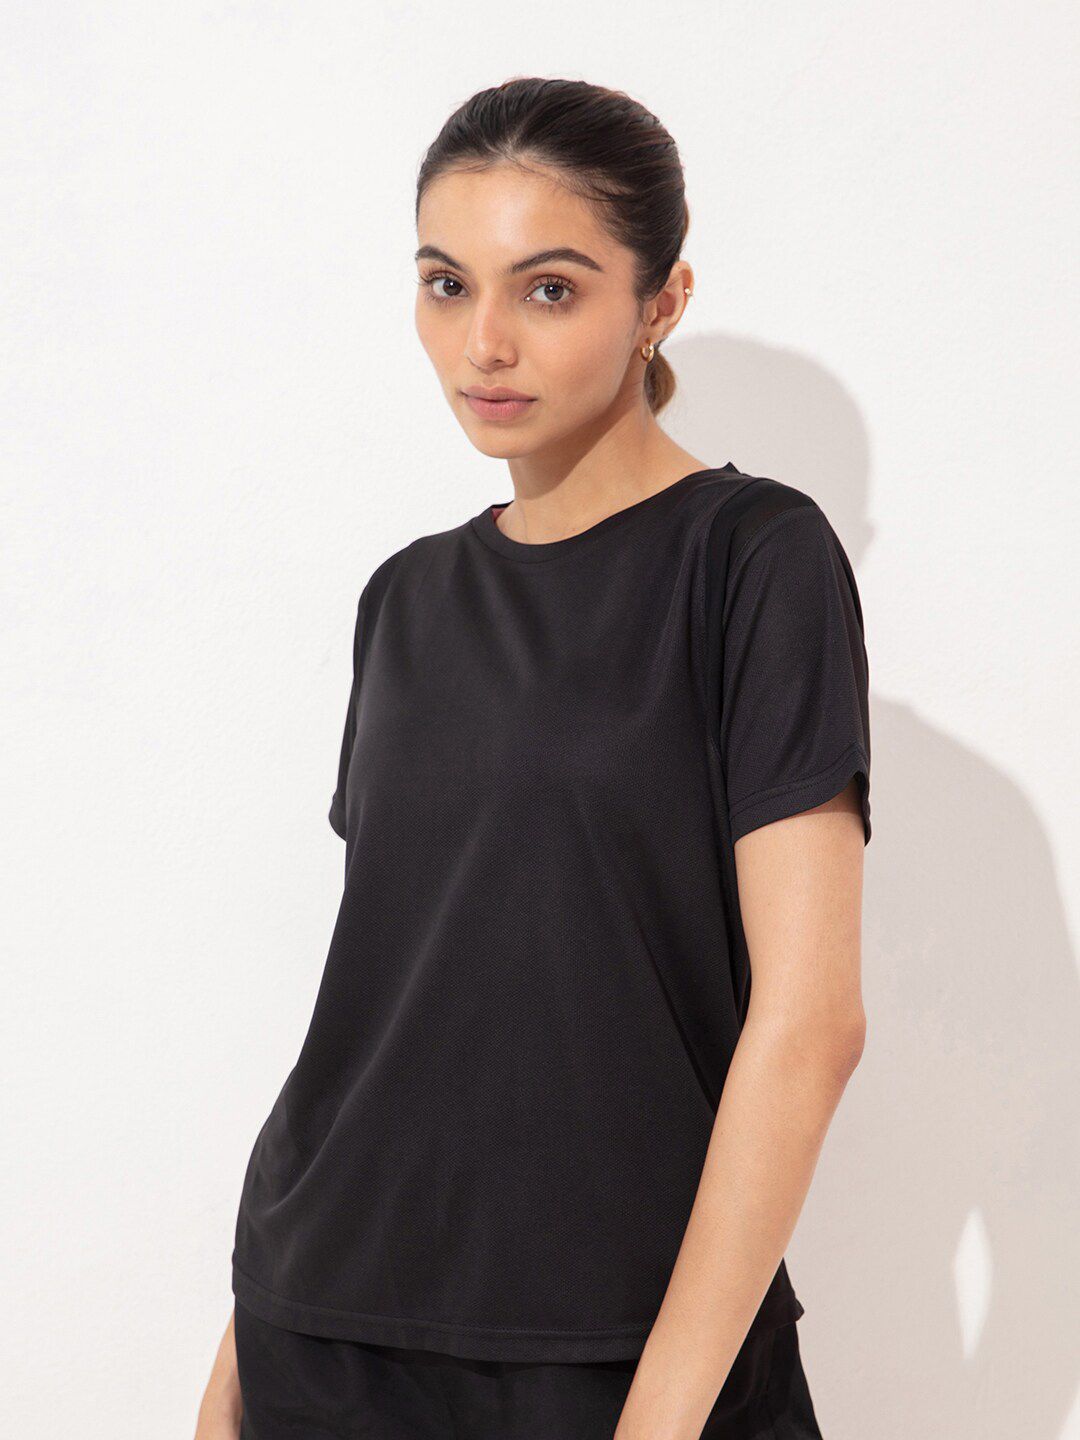 KICA Women Black Solid Sport T-shirt Price in India